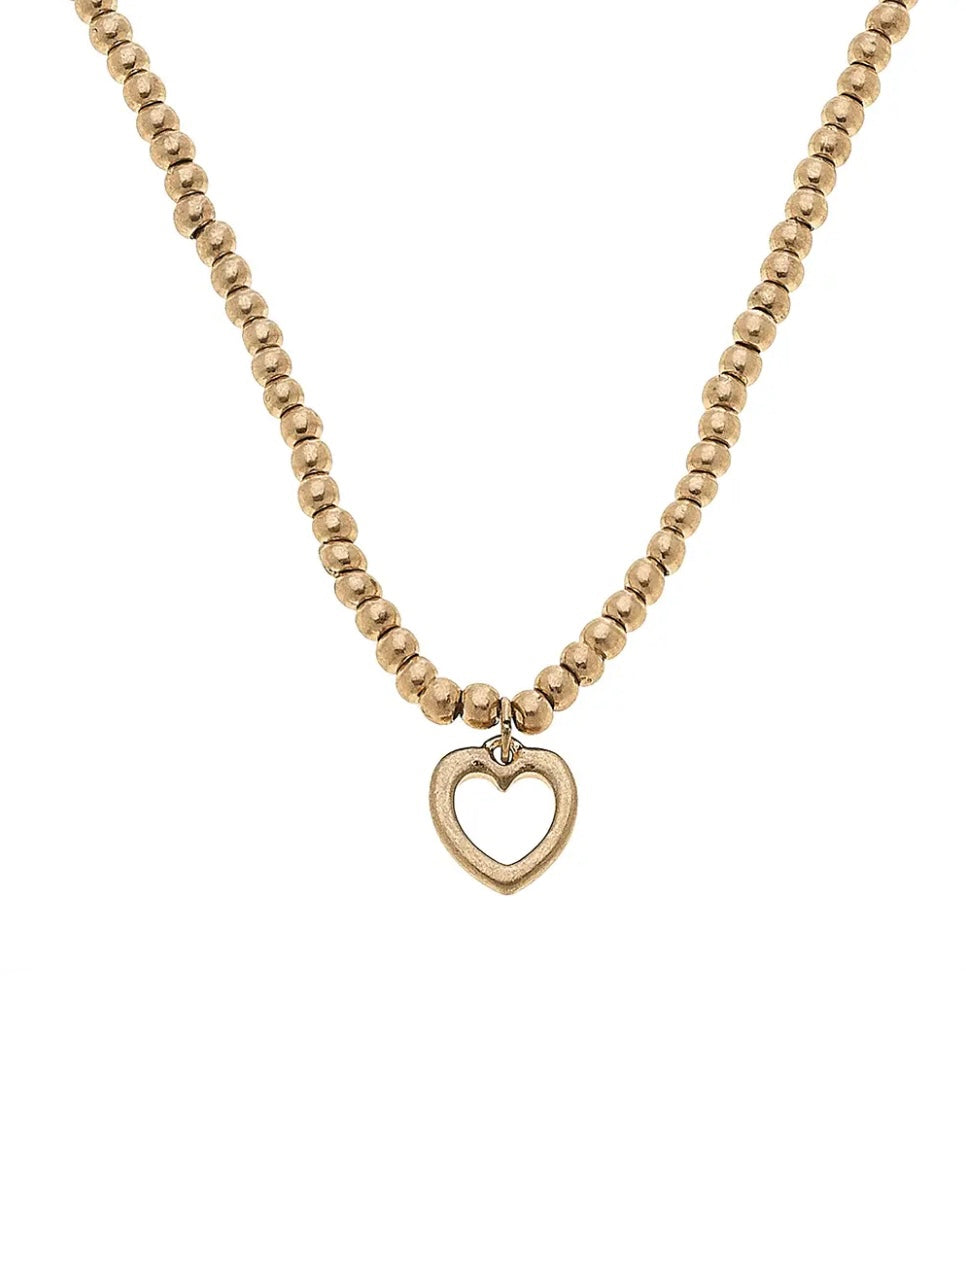 Aria Sphere Necklace in Worn Gold - Heart